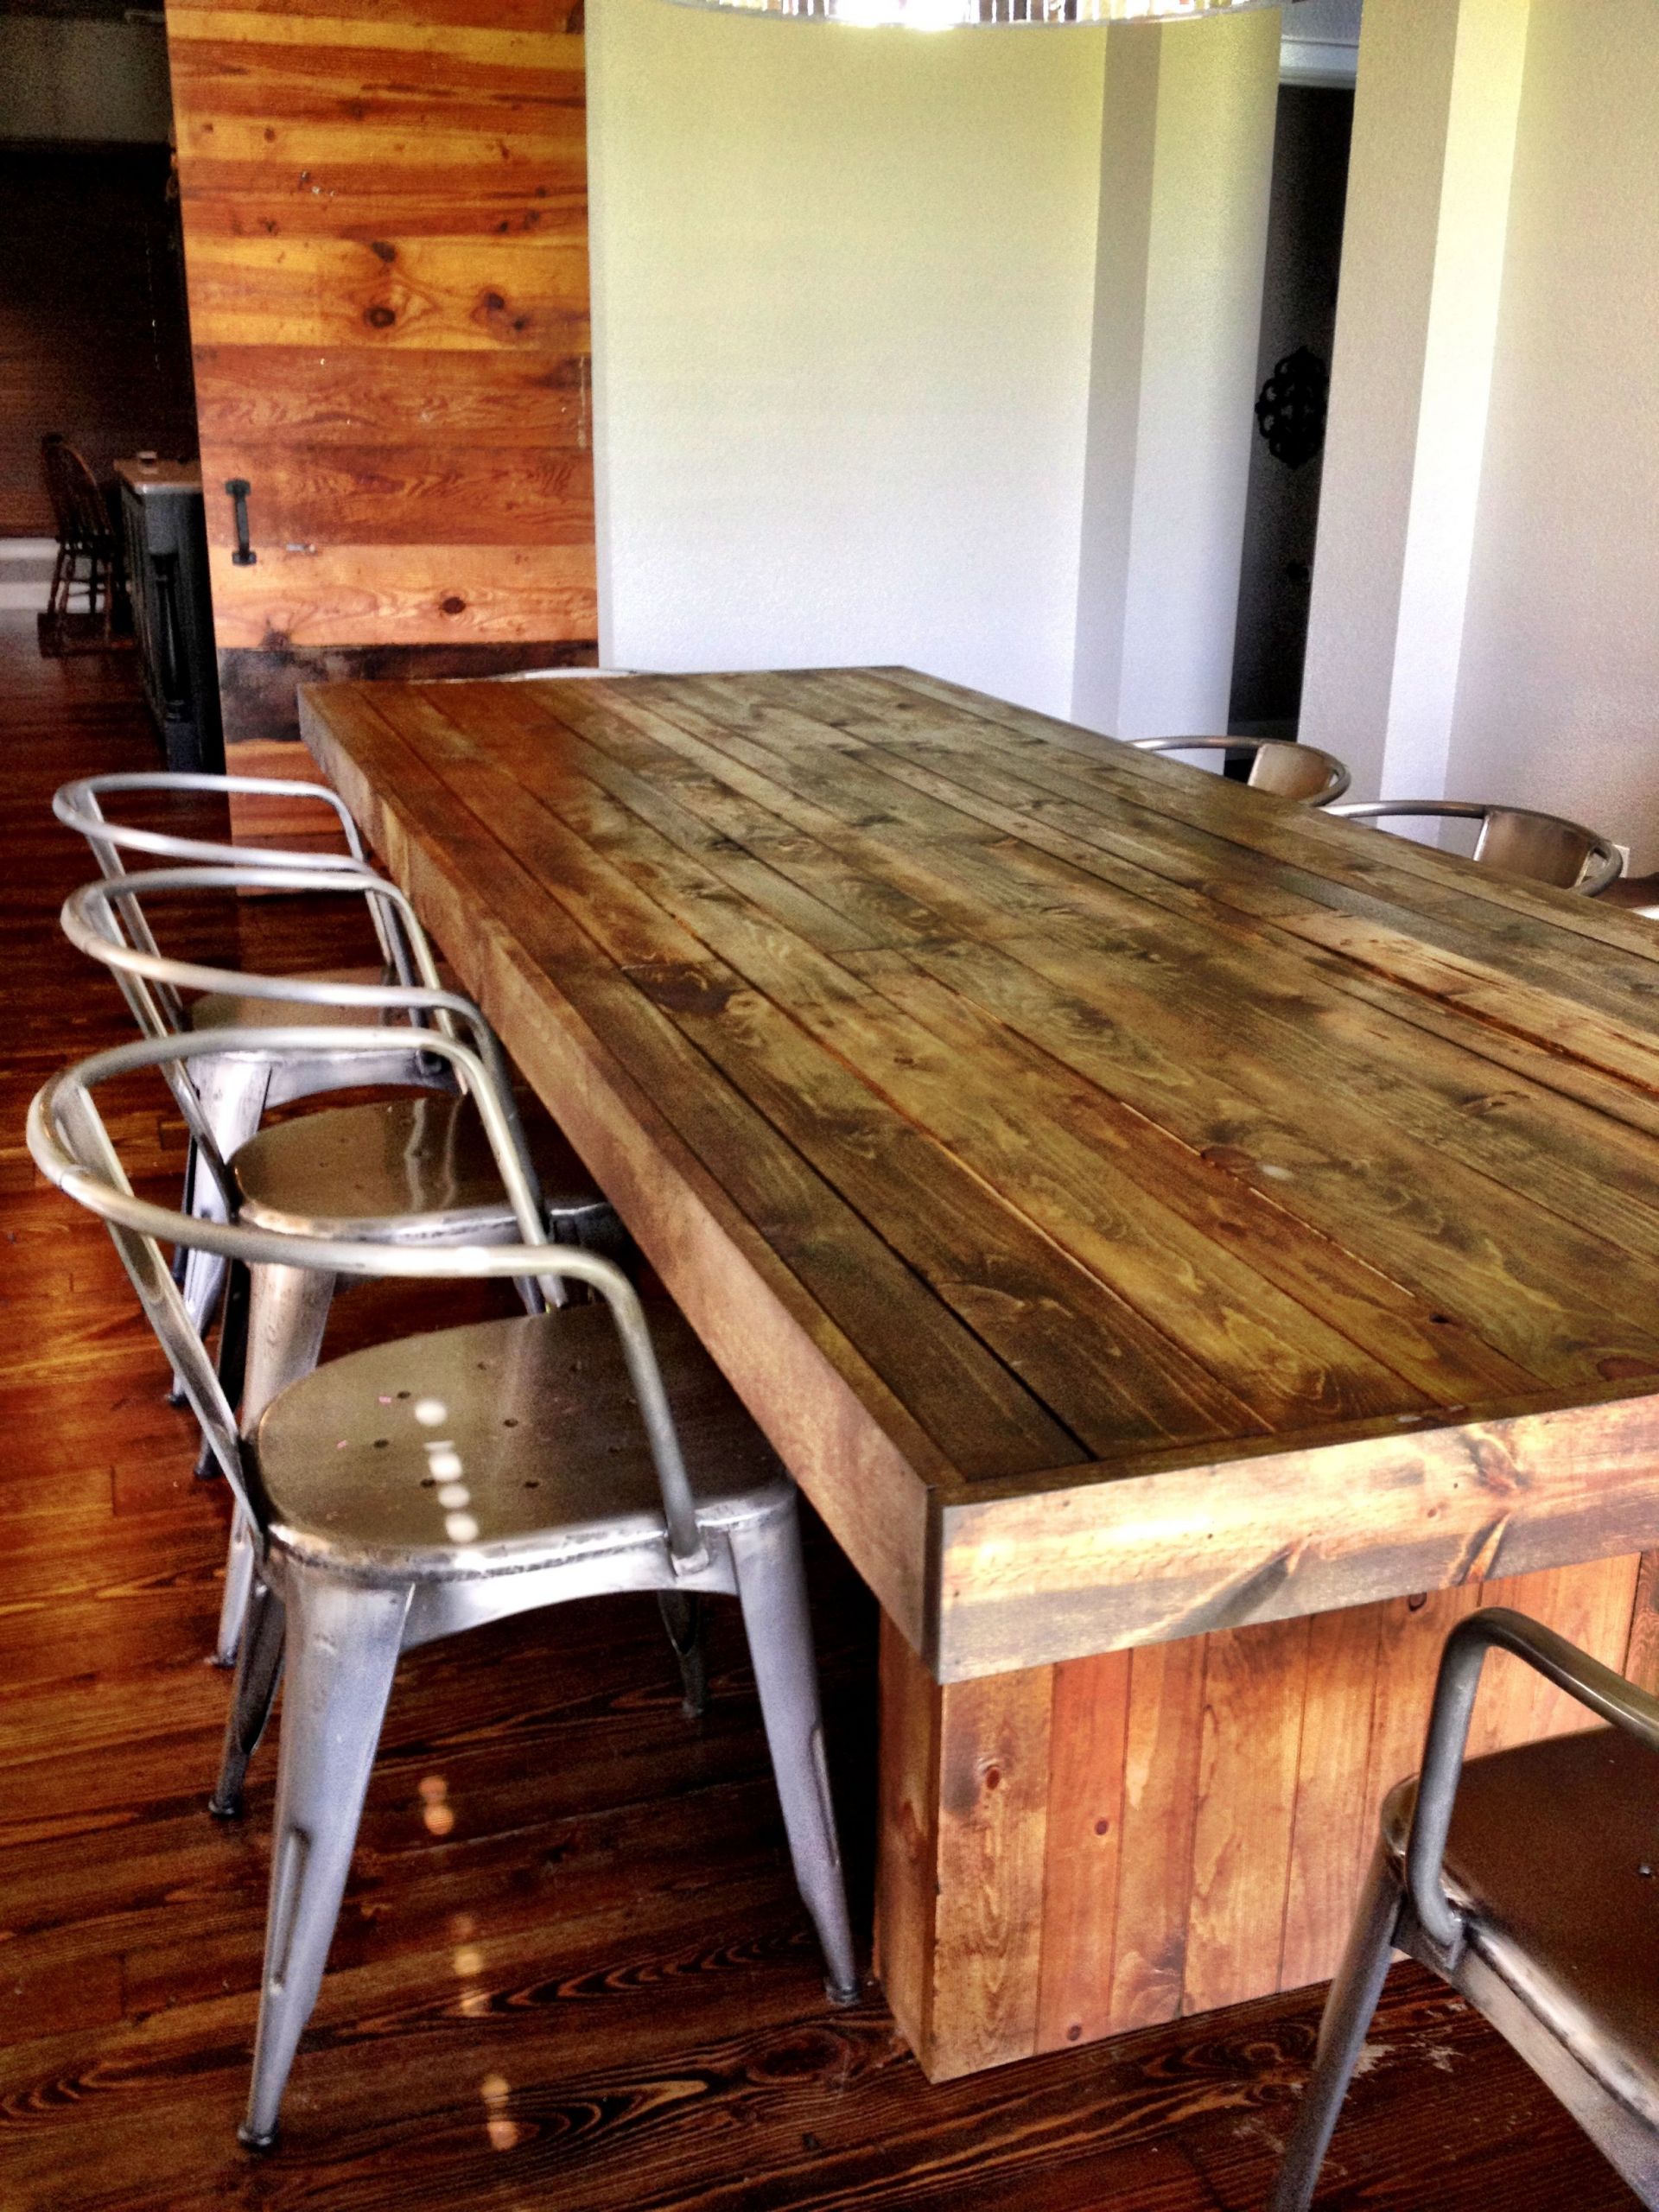 DIY Reclaimed Wood Dining Table
 DIY reclaimed wood dining table inspired by West Elm